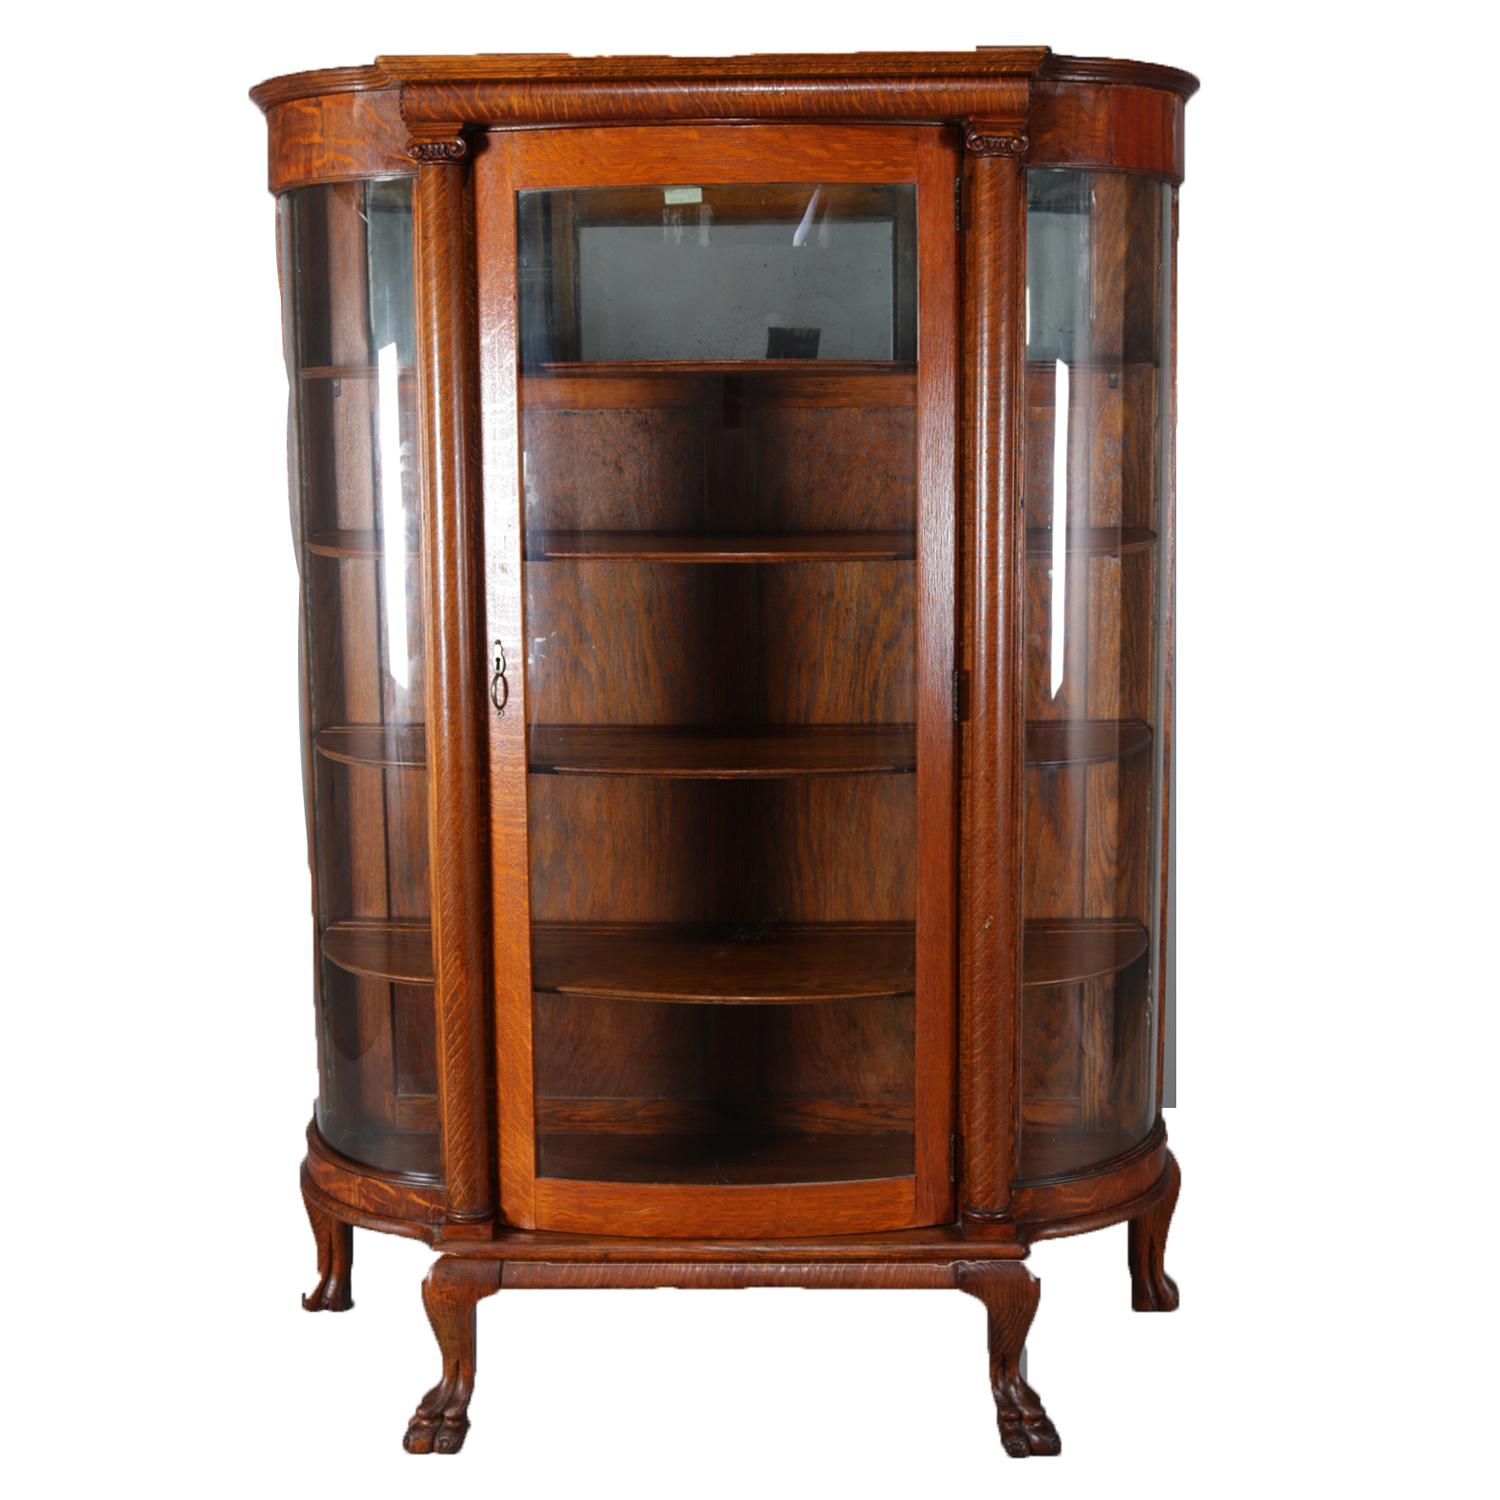 An antique Victorian china cabinet features oak frame with single glass door flanked by Corinthian column supports and curved glass sides, fixed shelf interior with mirrored upper, and raised on carved paw feet, circa 1910

Measures: 61.75